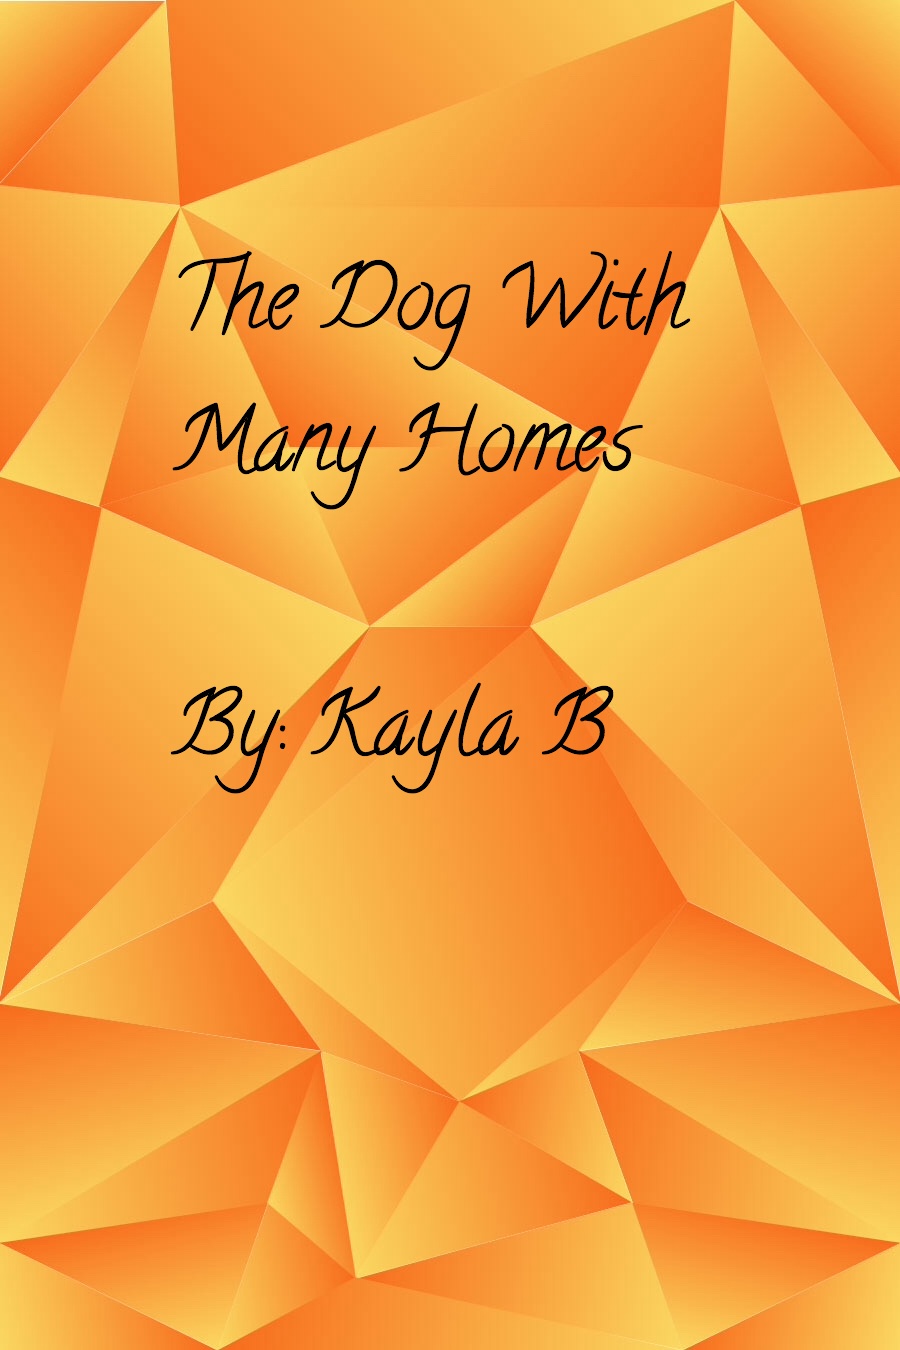 The Dog with Many Homes by Kayla B